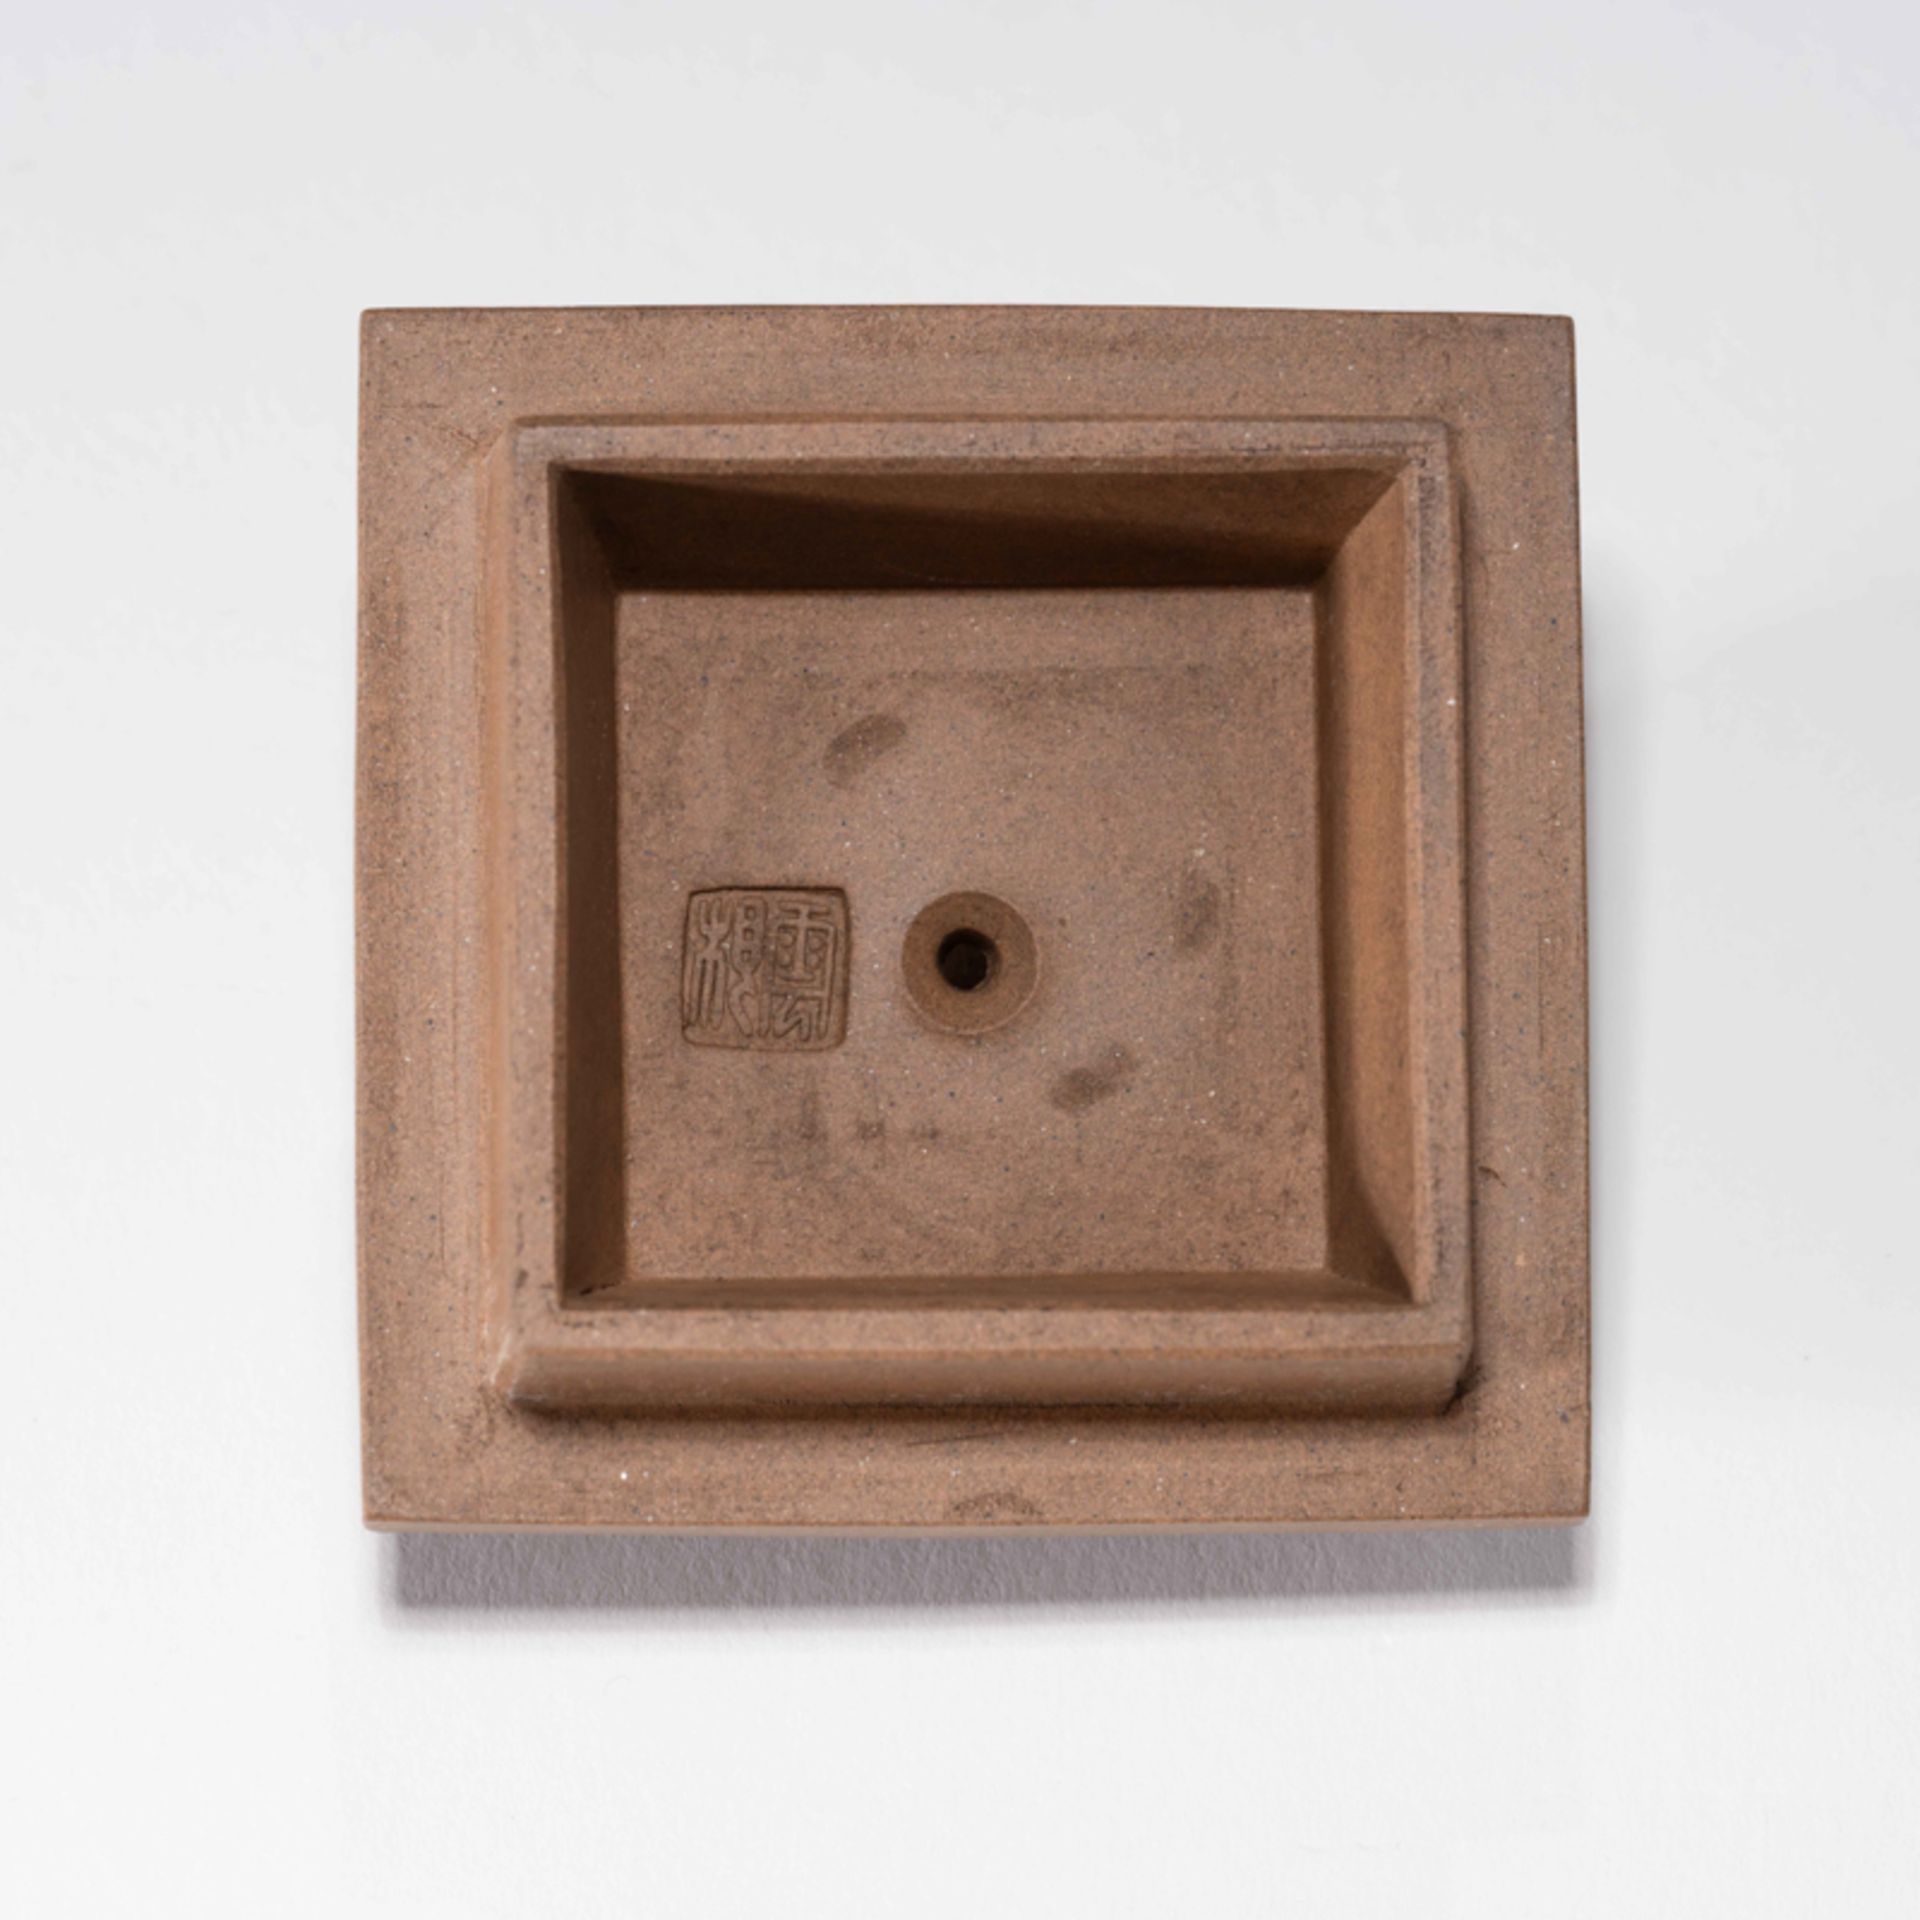 A CHINESE ZISHA 'LANDSCAPE' SQUARE POT, WITH '雲根 (YUN GEN), 鐵畫軒 (TIE HUA XUAN)' MARKS - Image 10 of 12